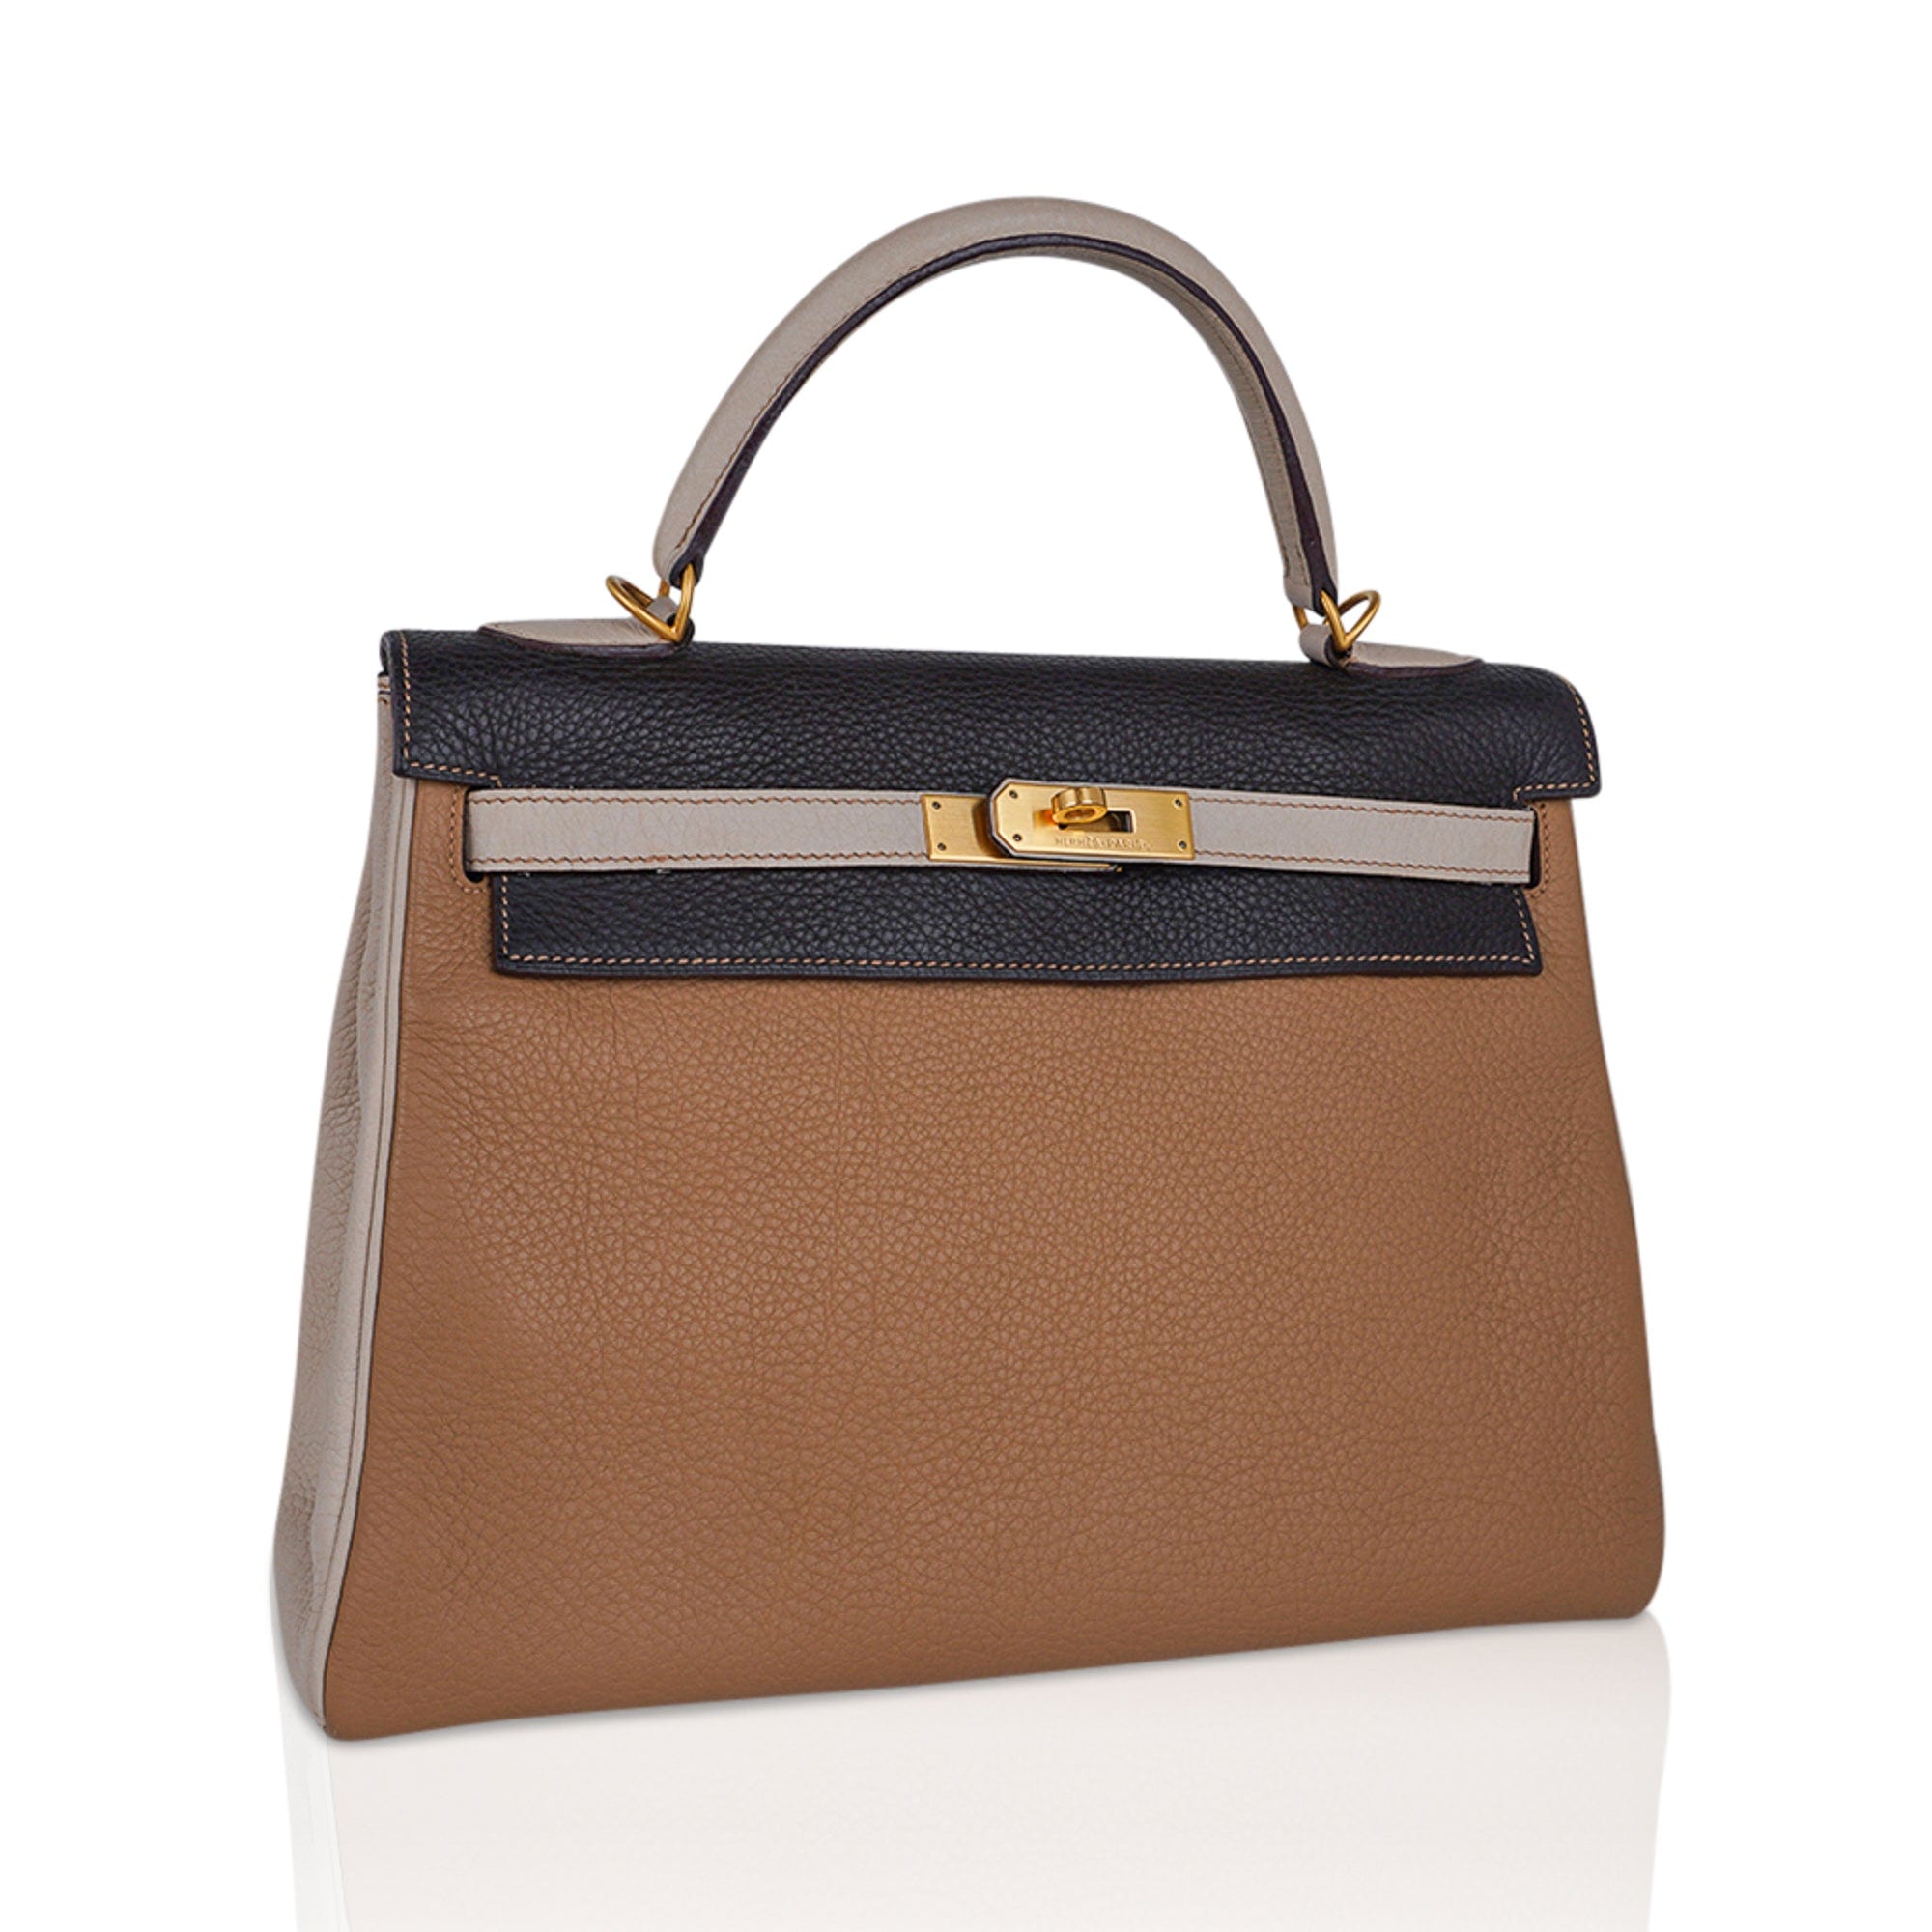 Hermes Limited Edition Kelly 32 Tri-Color Bag Tabac Camel, Ebene, & Parchemin Clemence Leather with Brushed Gold Hardware